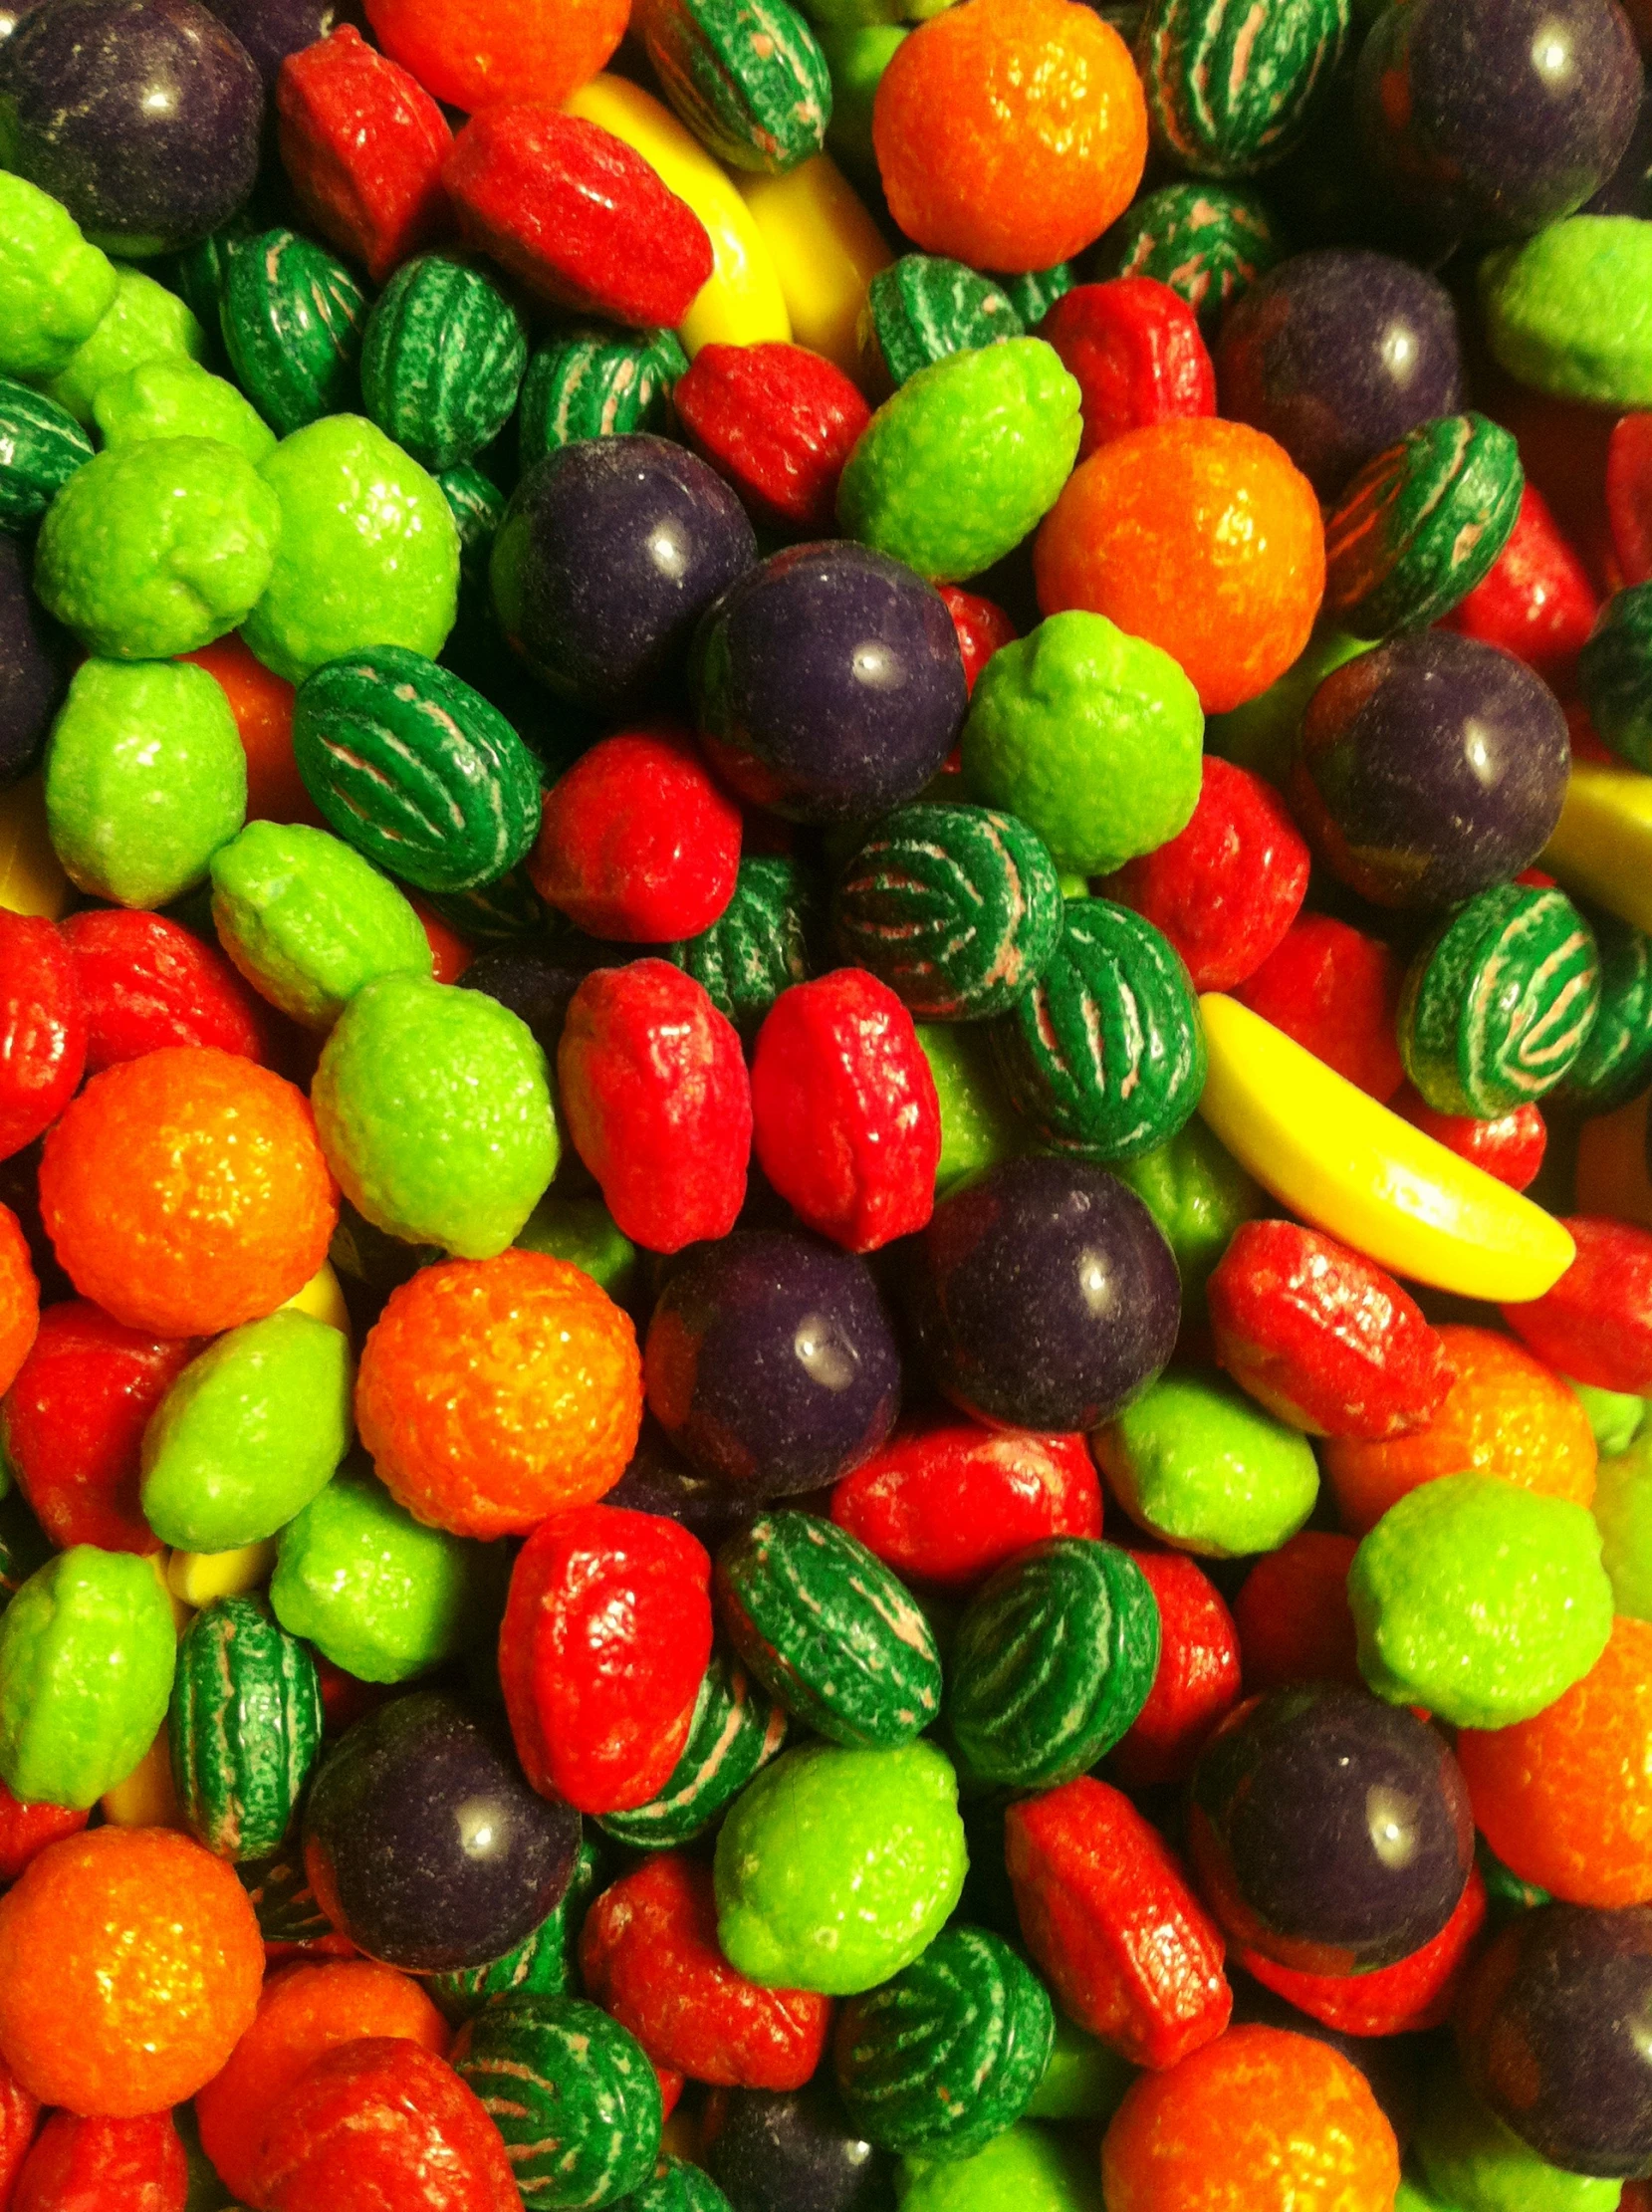 a close up view of many colorful fruits